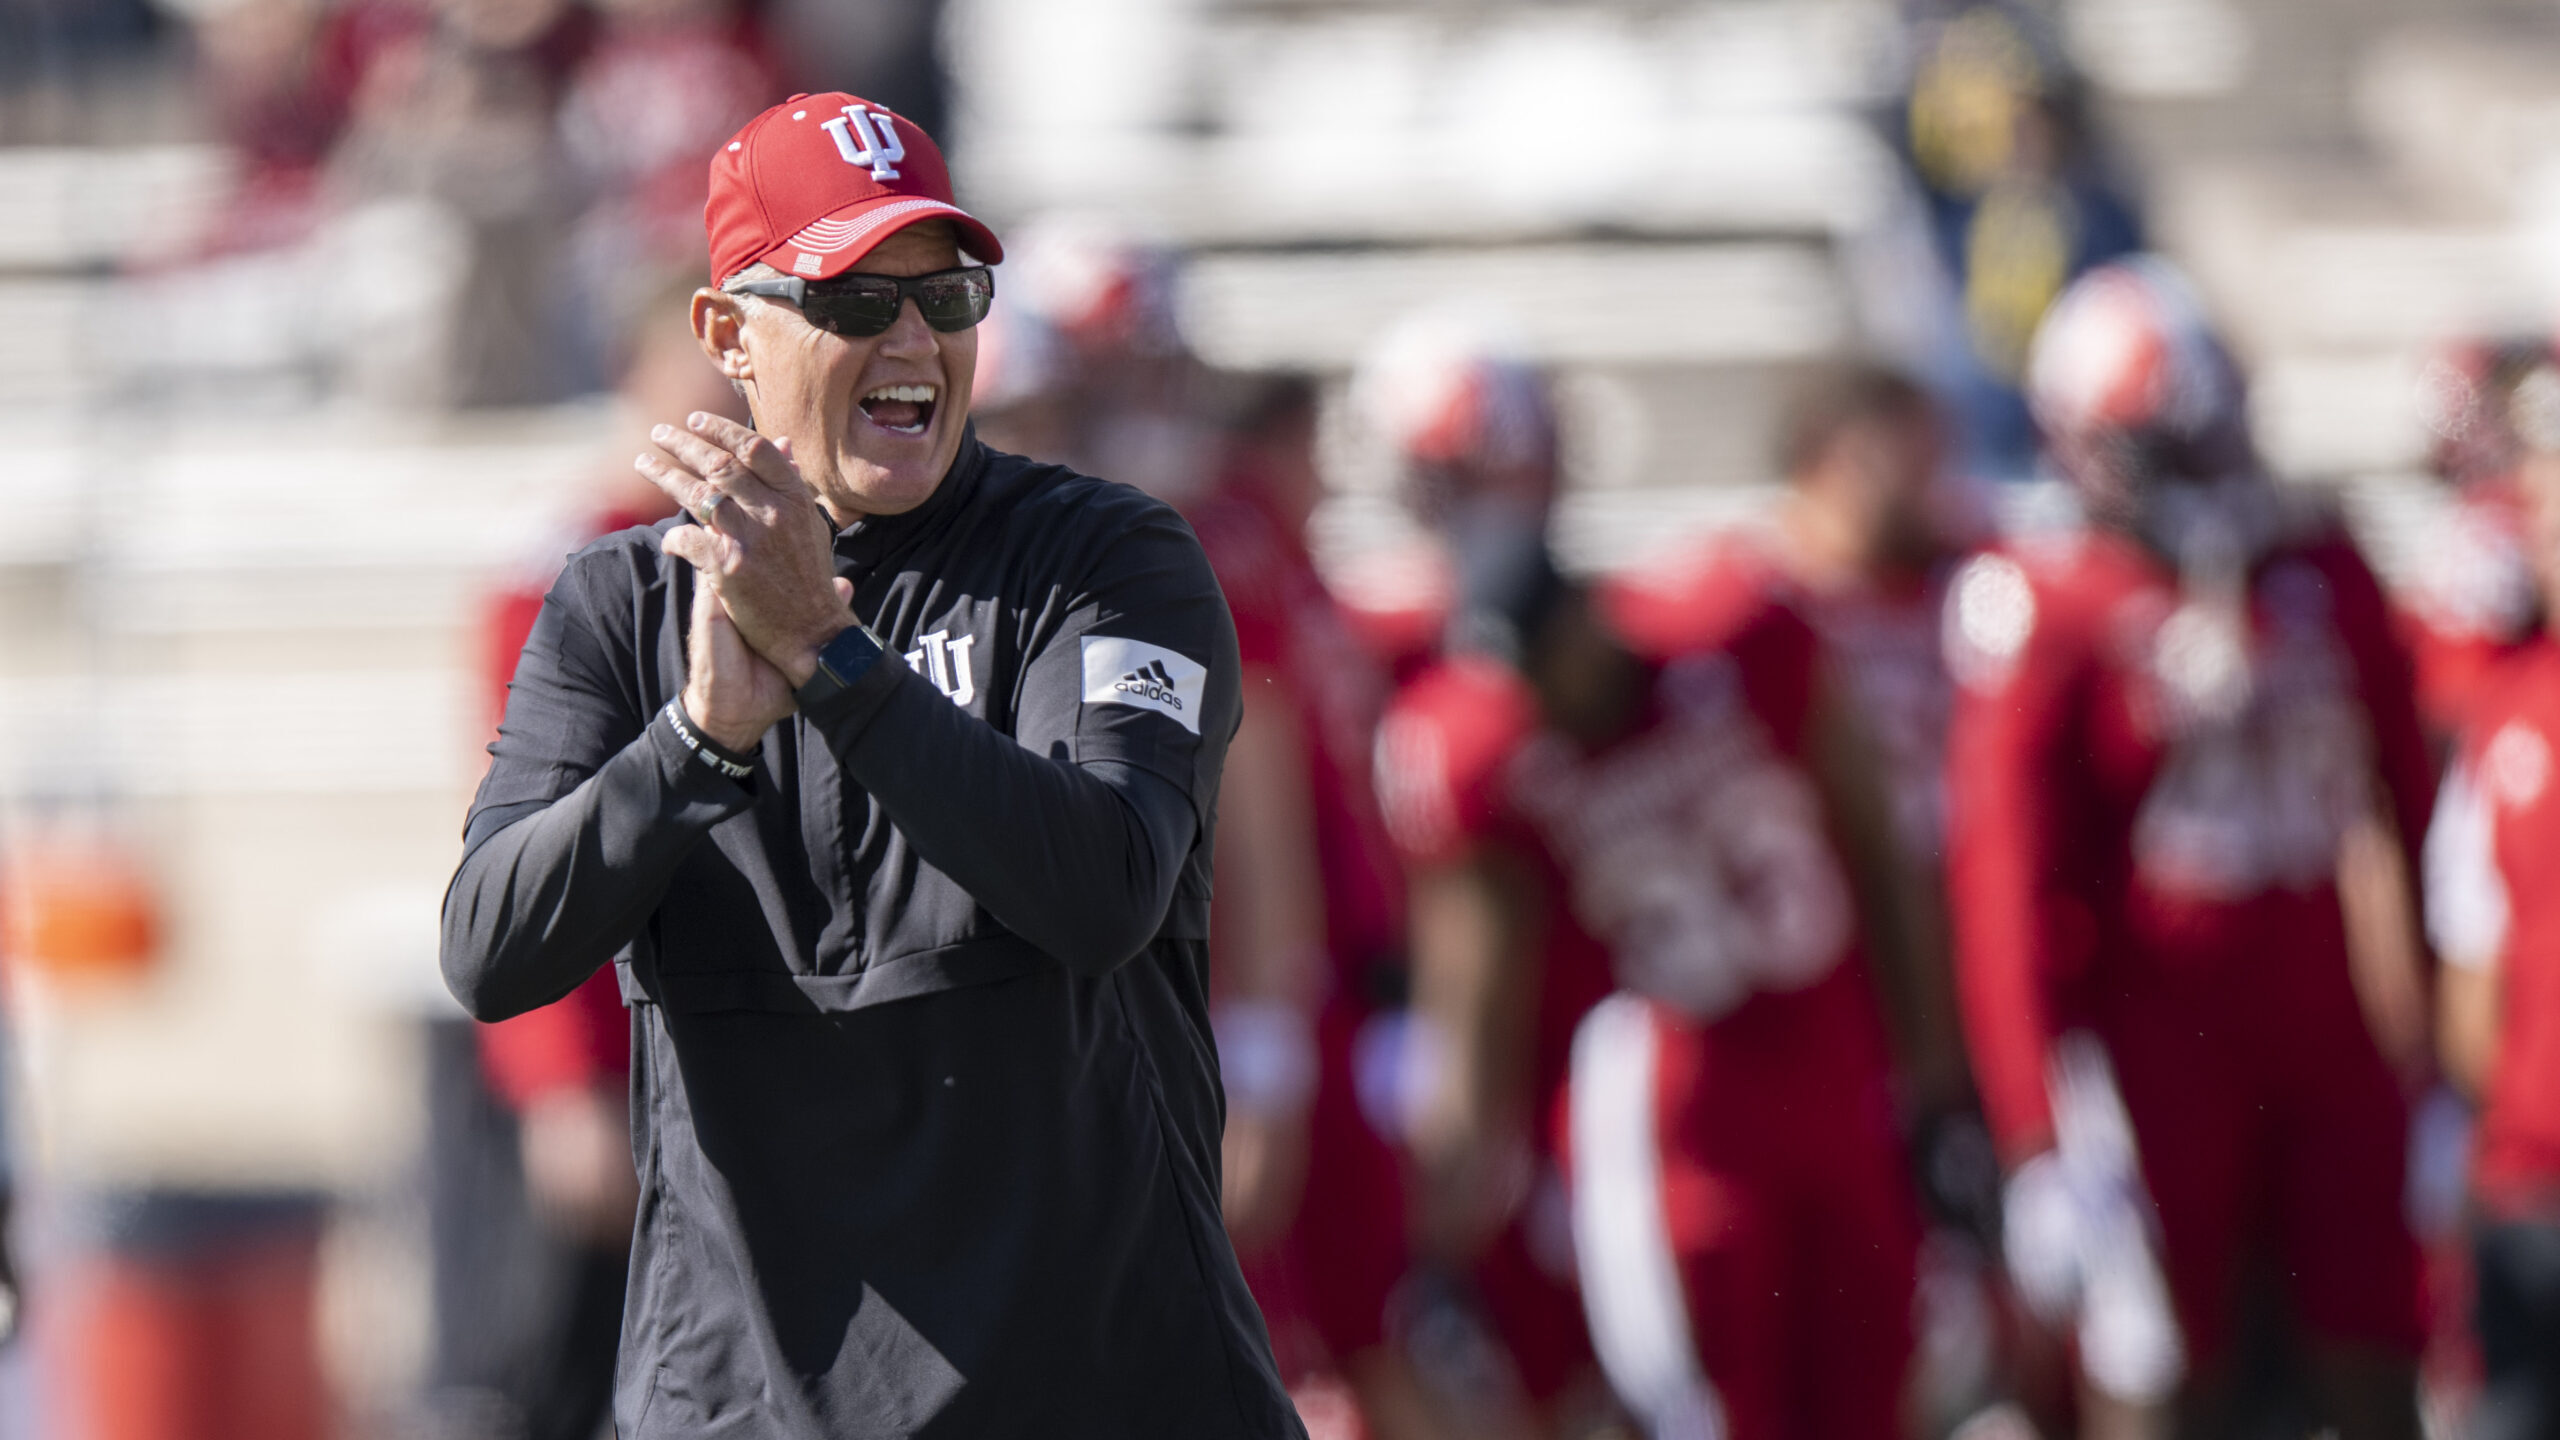 Oct 8, 2022; Bloomington, Indiana, USA; Indiana football head coach Tom Allen yells and claps at his team during warmups before the game against the against the Michigan Wolverines at Memorial Stadium. Mandatory Credit: Marc Lebryk-USA TODAY Sports